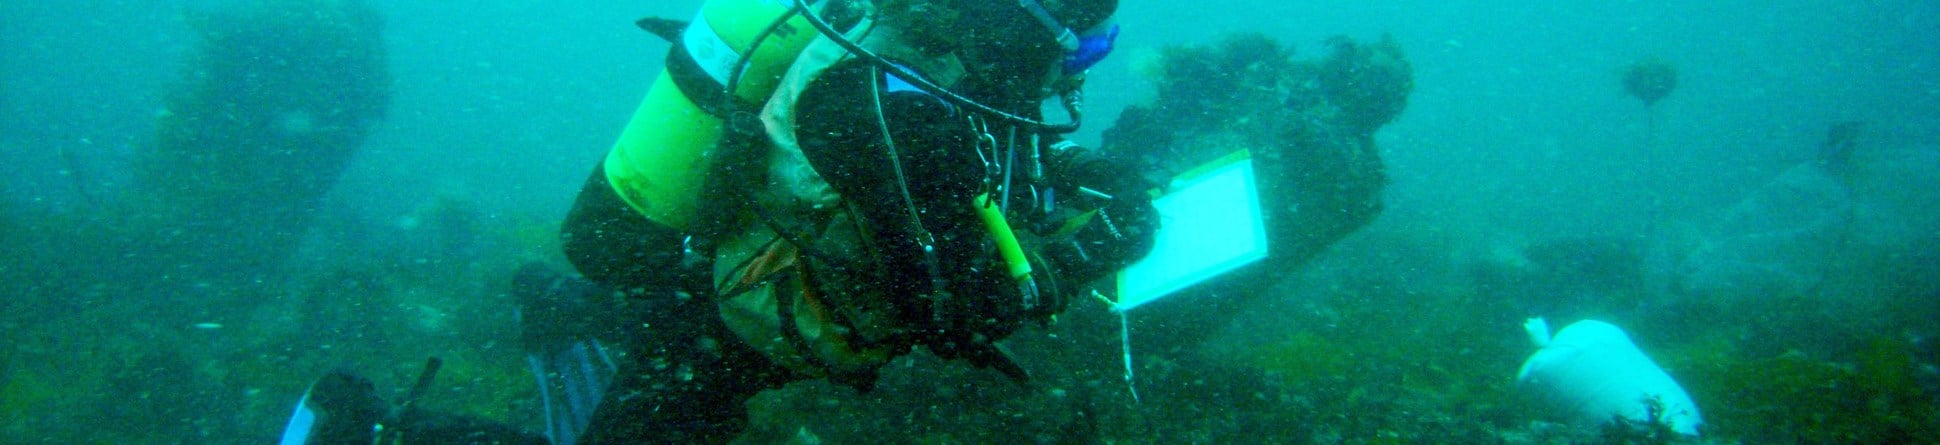 Diver recording on HMS Colossus.  HMS Colossus was a 74 gun warship built in 1787 at Gravesend and wrecked off Samson in the Scillies in 1798.